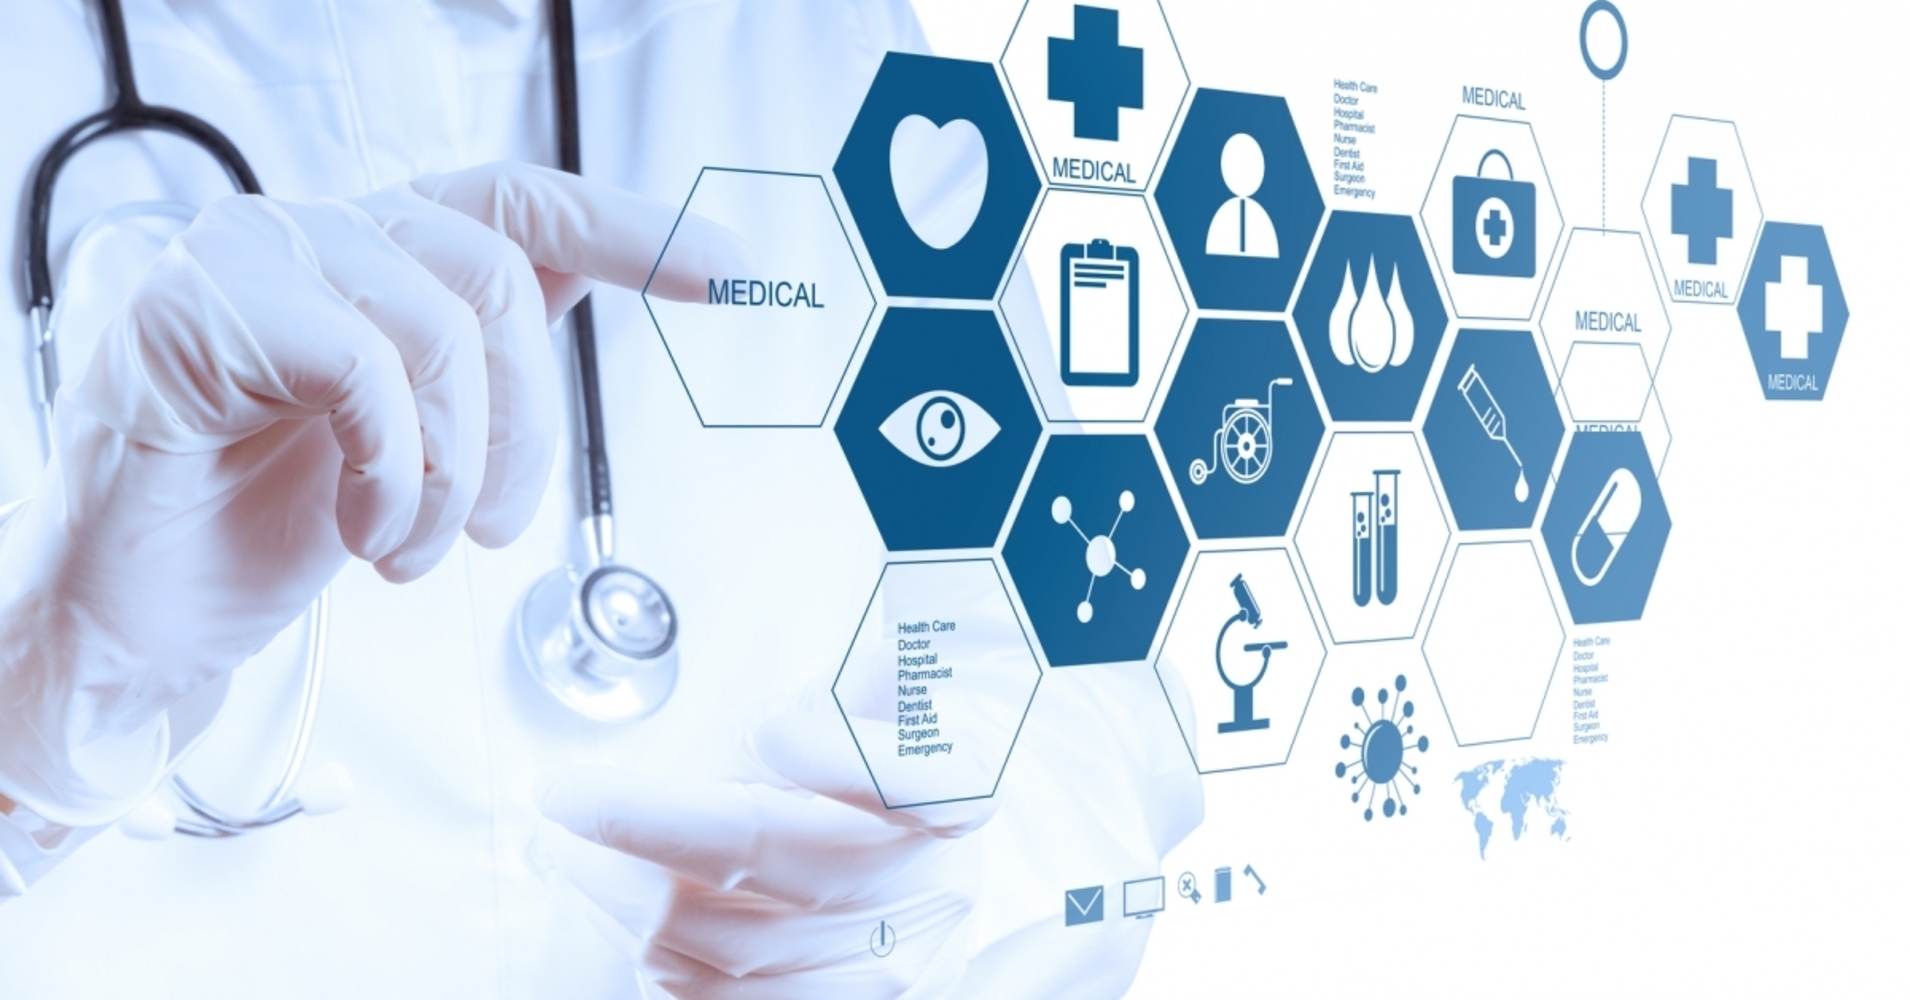 Standardizing Best Practices on the Blockchain Will Revolutionize the Global Healthcare Industry